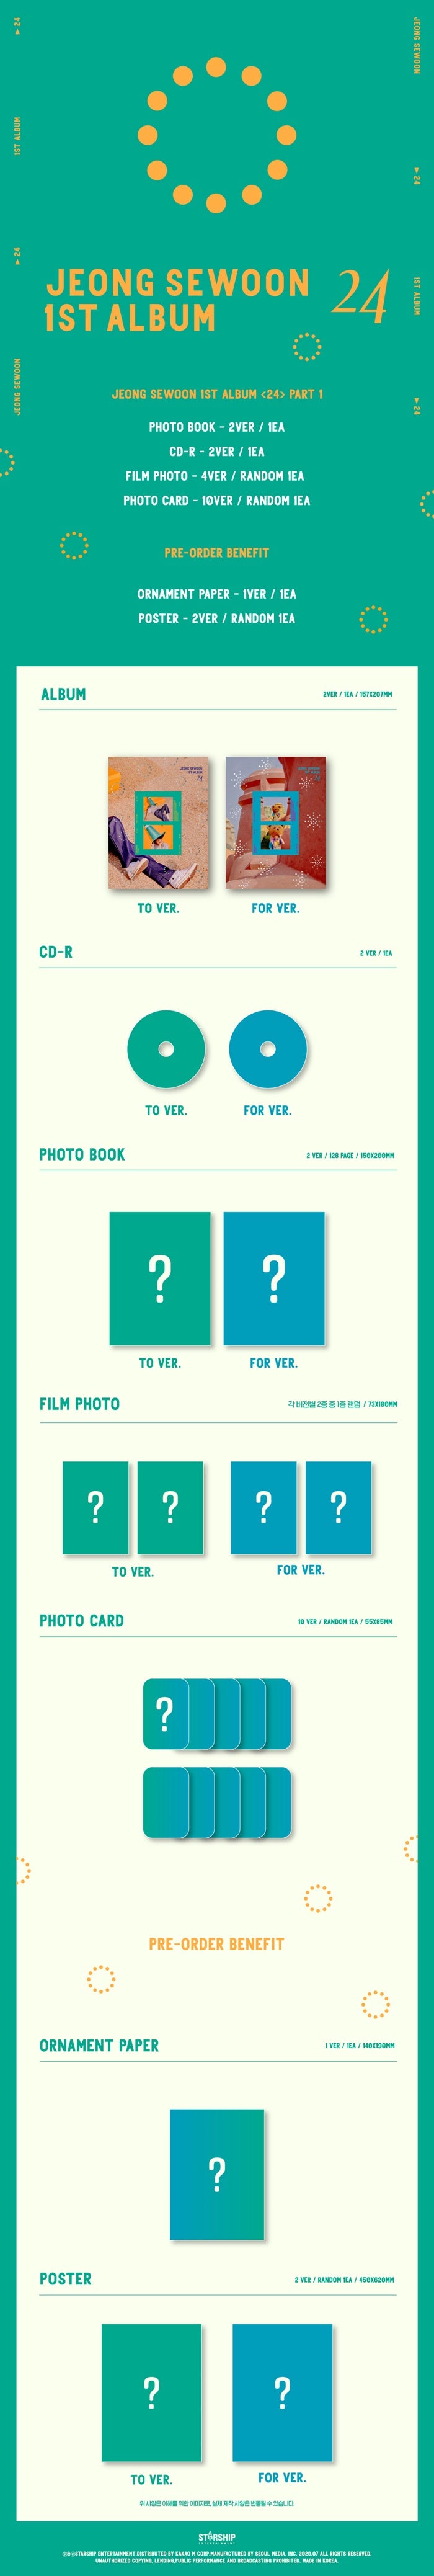 1 CD
1 Booklet (128 pages)
1 Film Photo
1 Photo Card